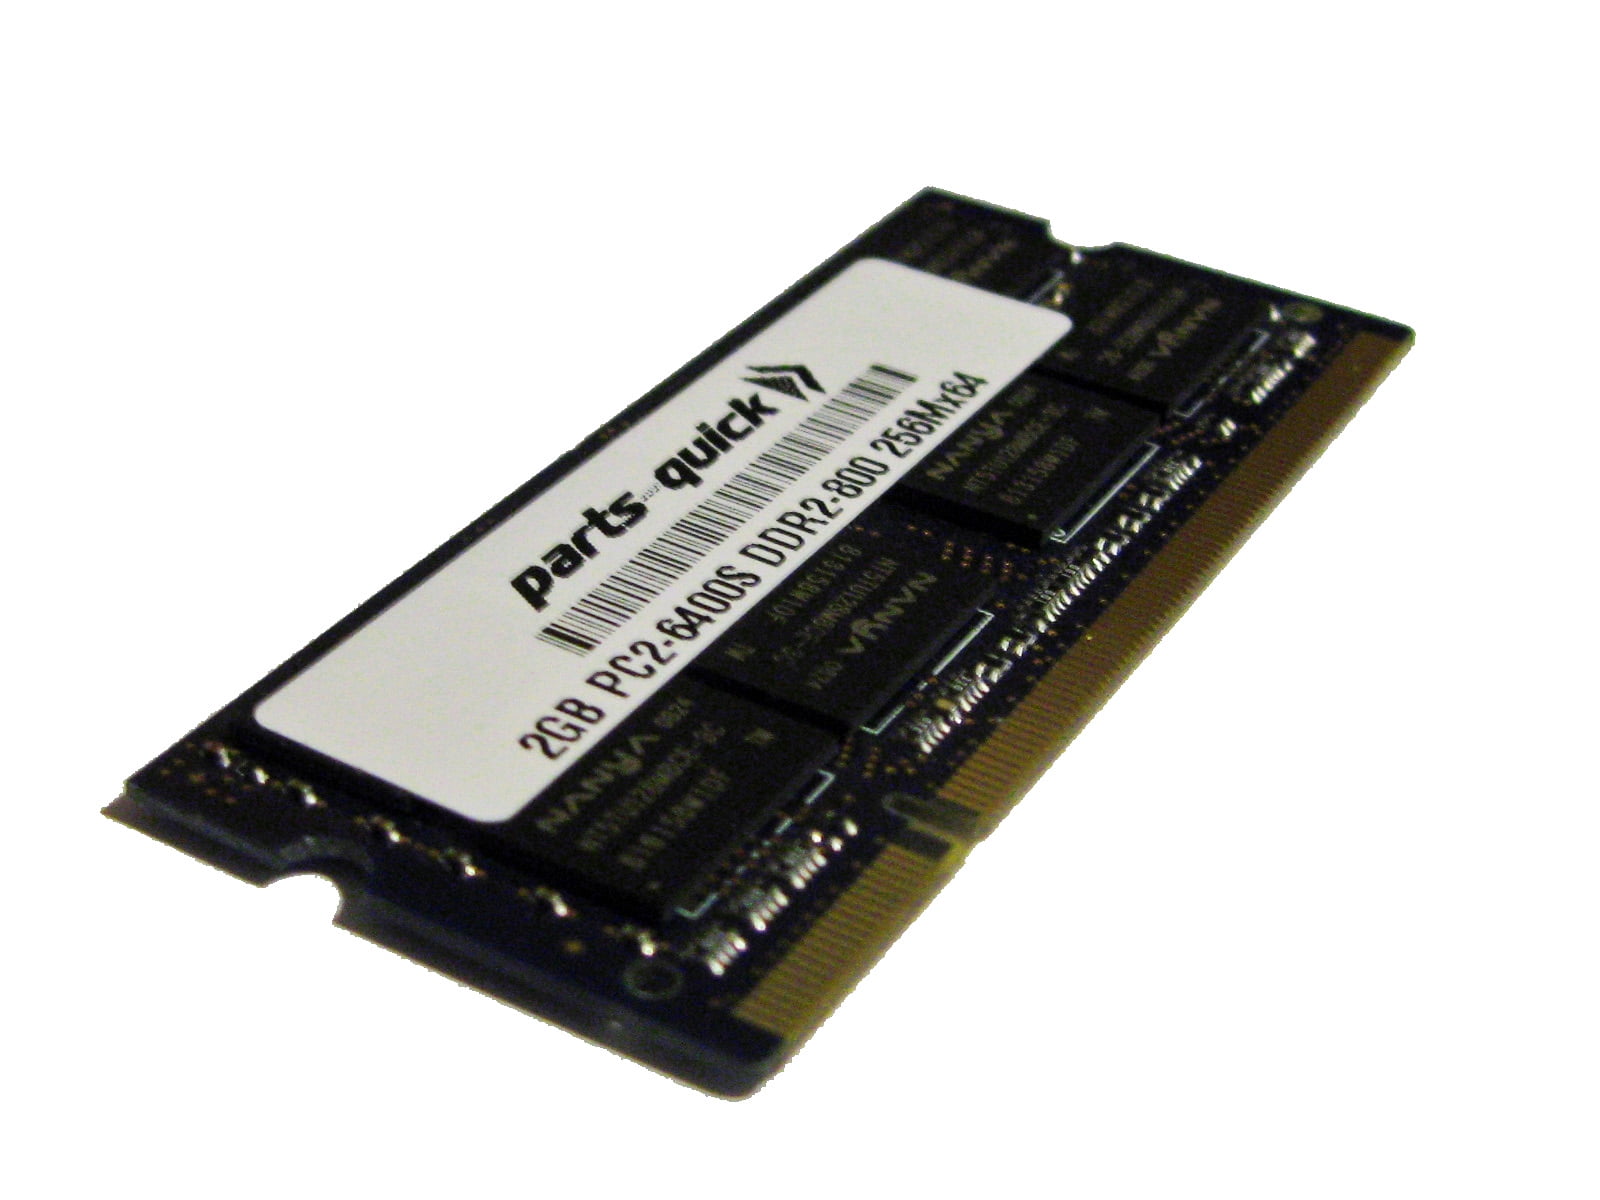 RAM Memory Upgrade for The Compaq/HP G60 Series G60-233NR Notebook/Laptop 2GB DDR2-800 PC2-6400 